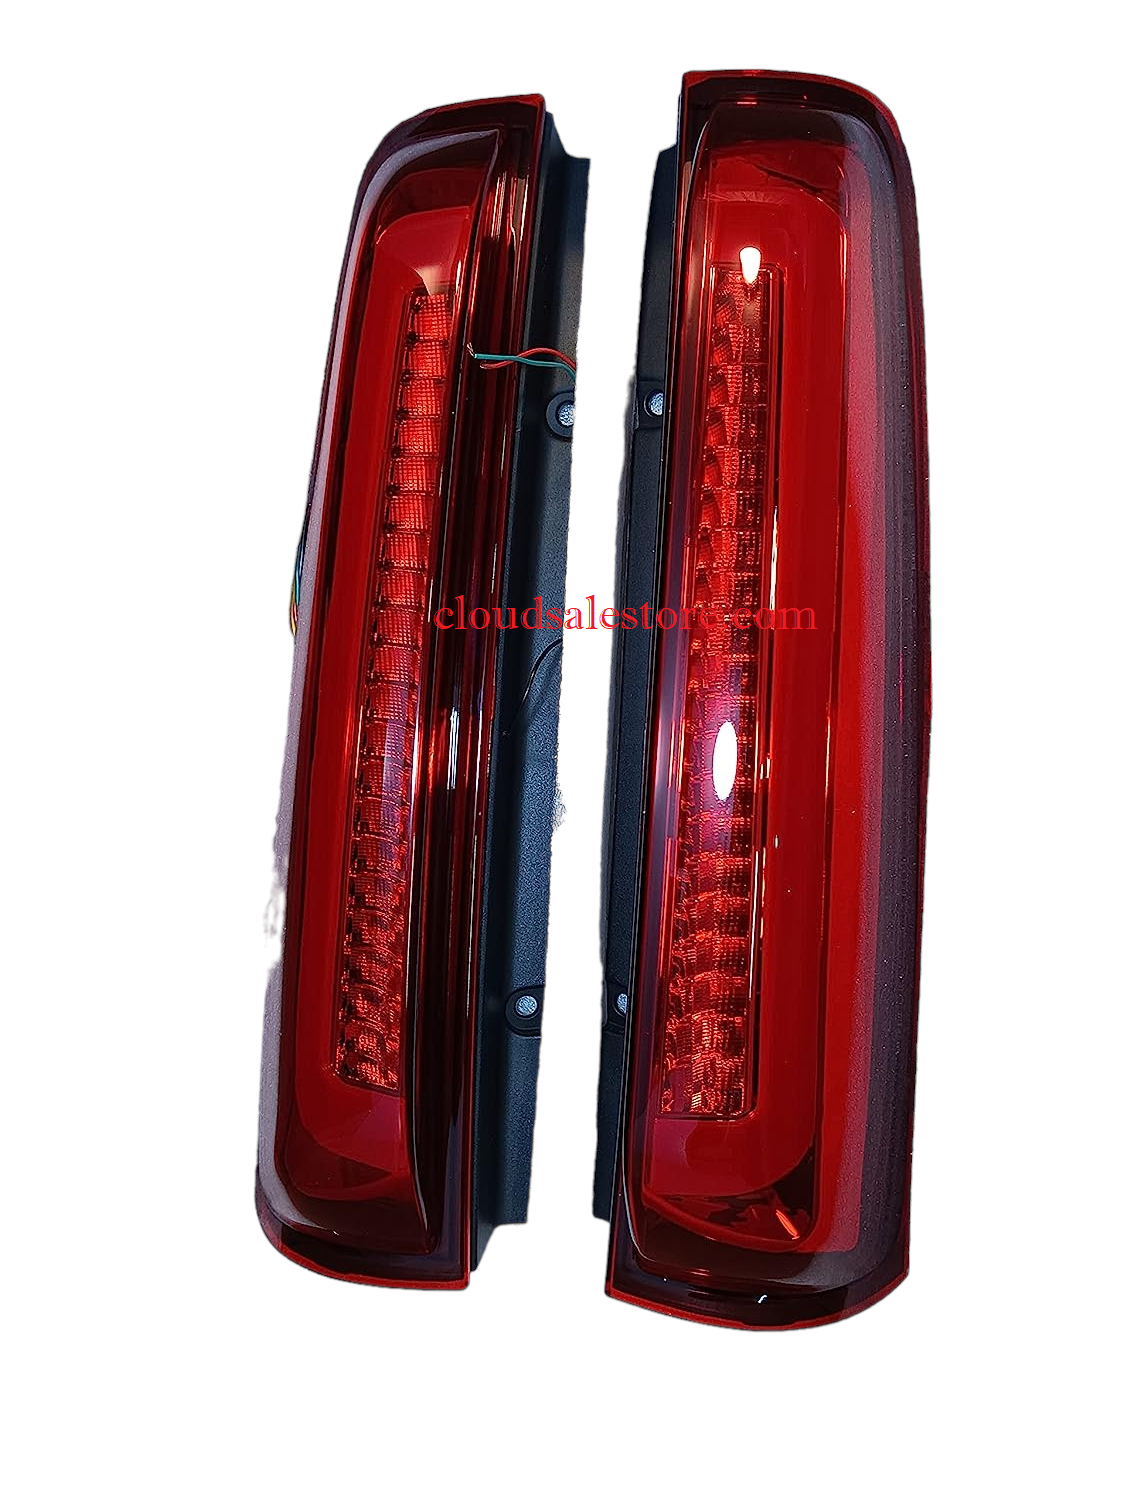 LED Rear Pillar Cluster Lights For Mahindra Scorpio 2017 Onward With Scanning and Matrix Mode – Set Of 2 Image 